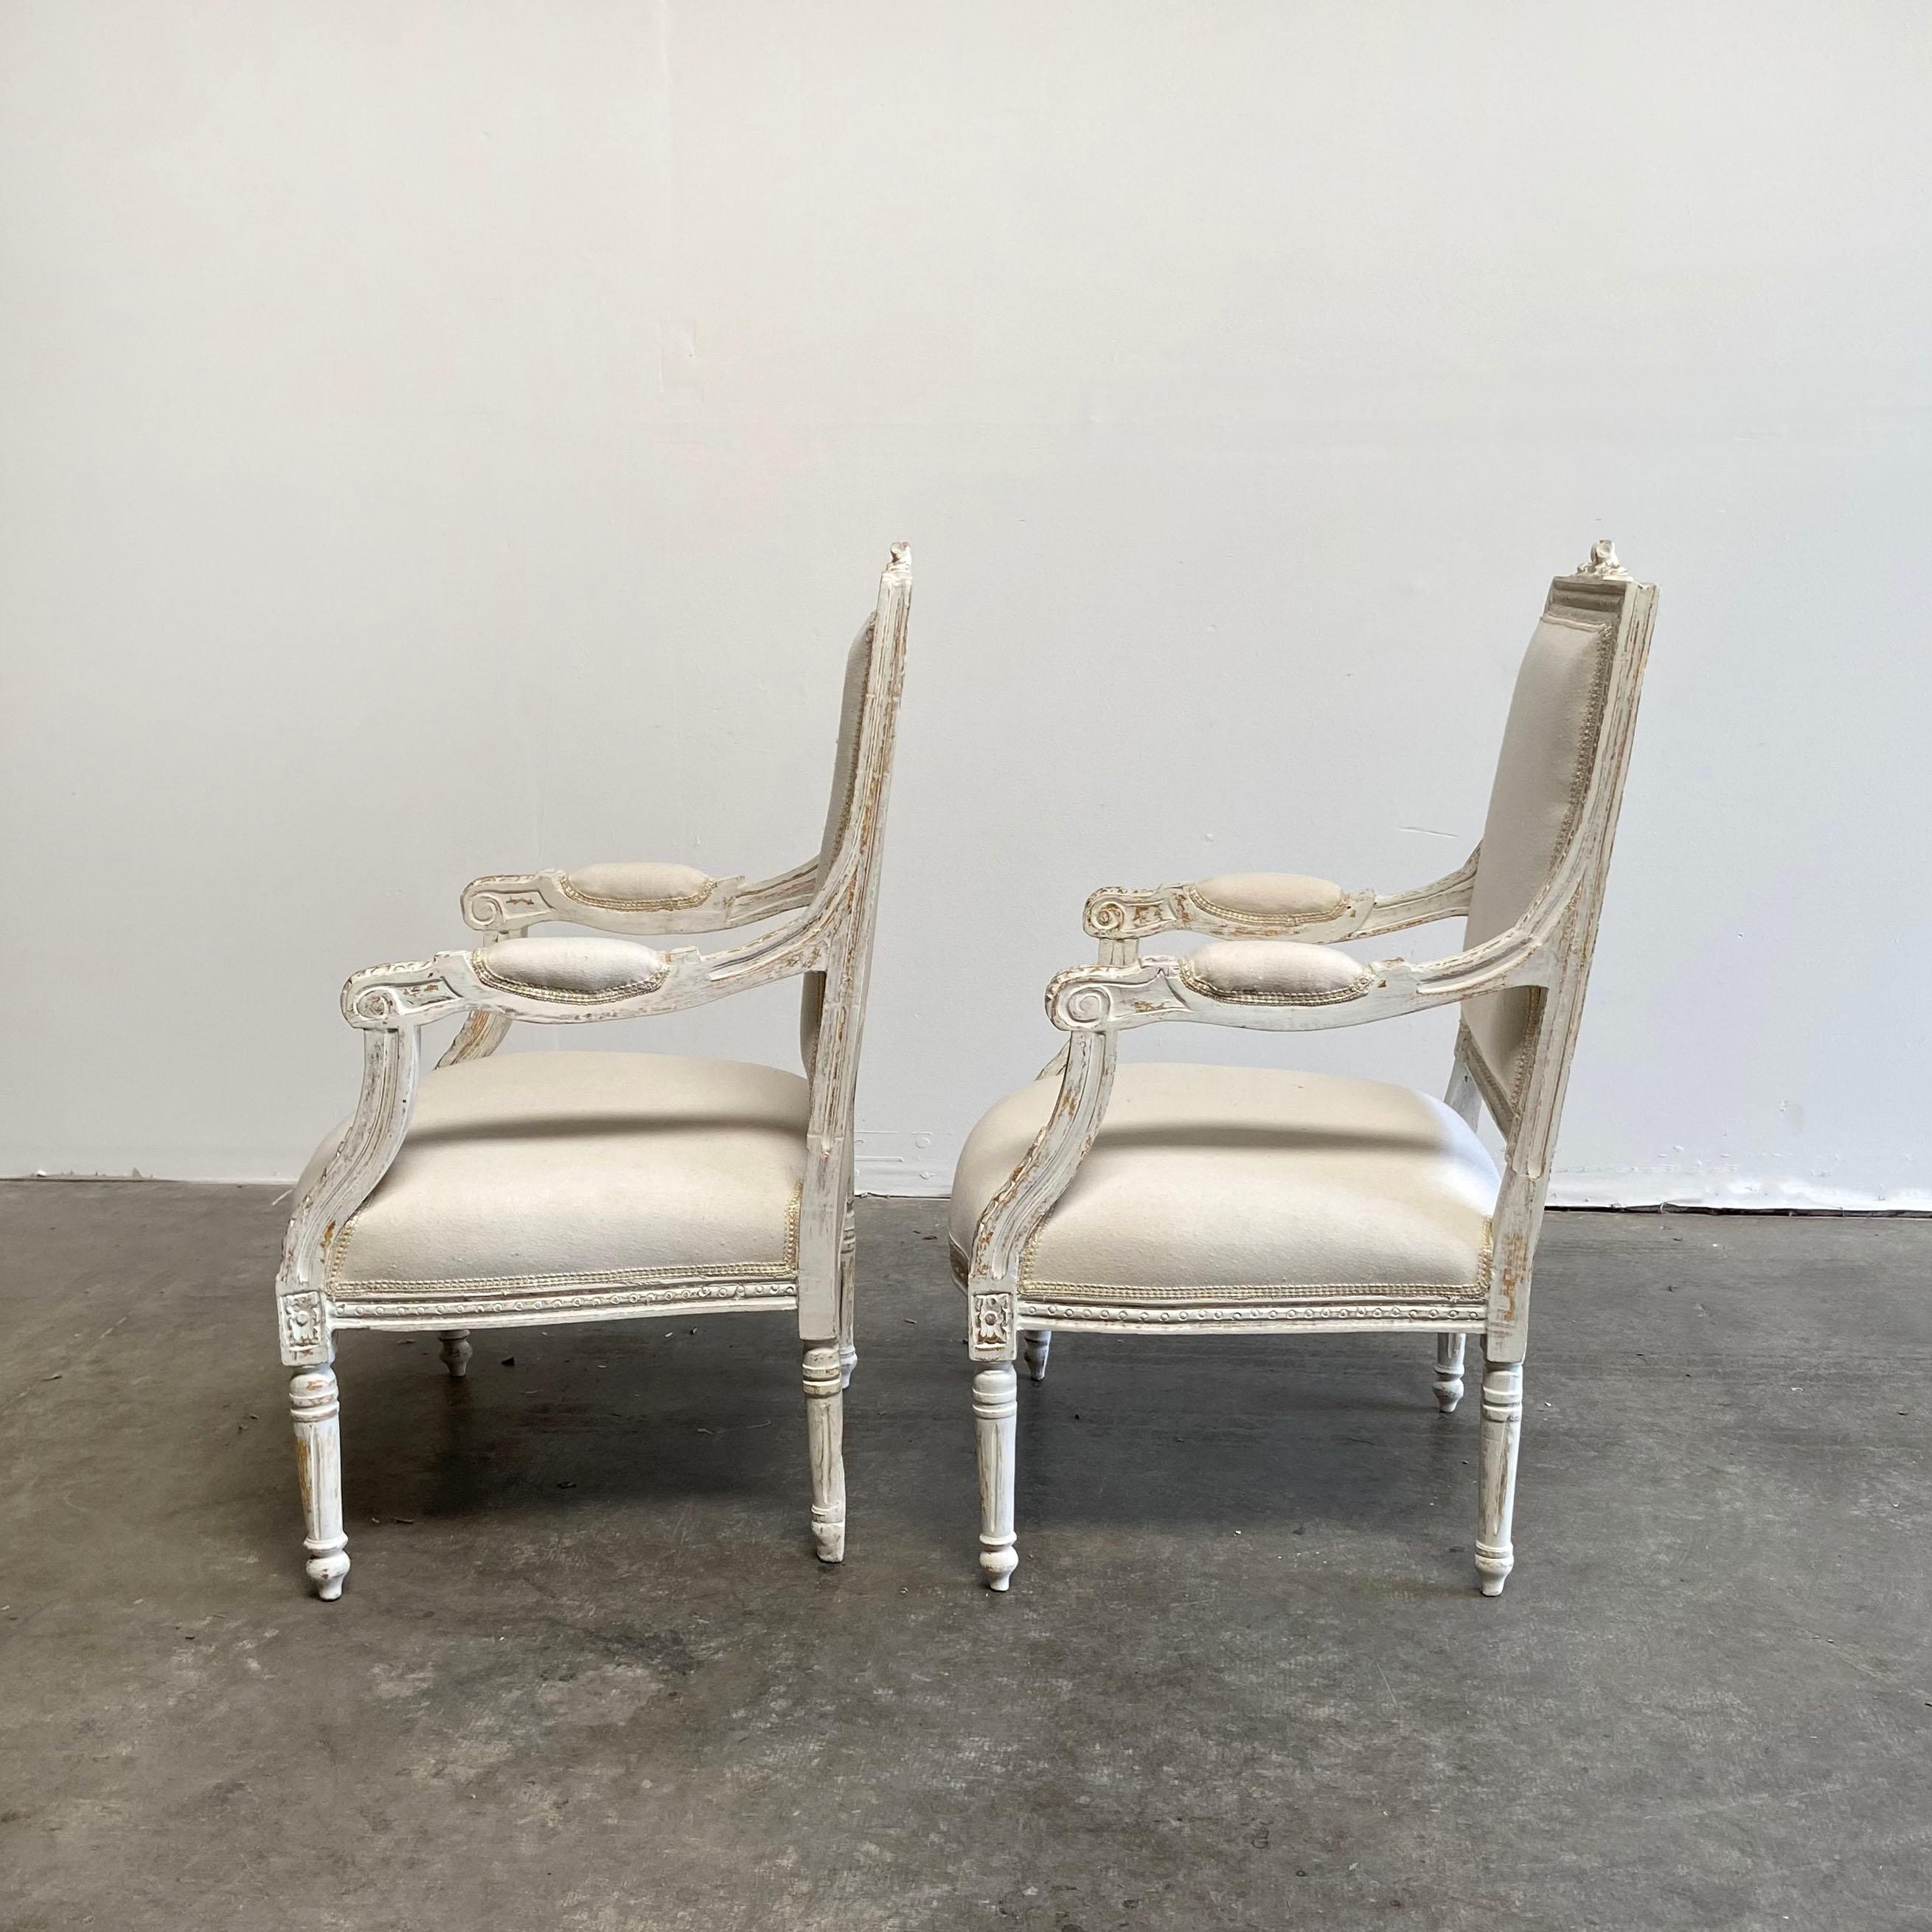 Cotton Vintage Pair of Painted and Upholstered Louis XVI Style Chairs